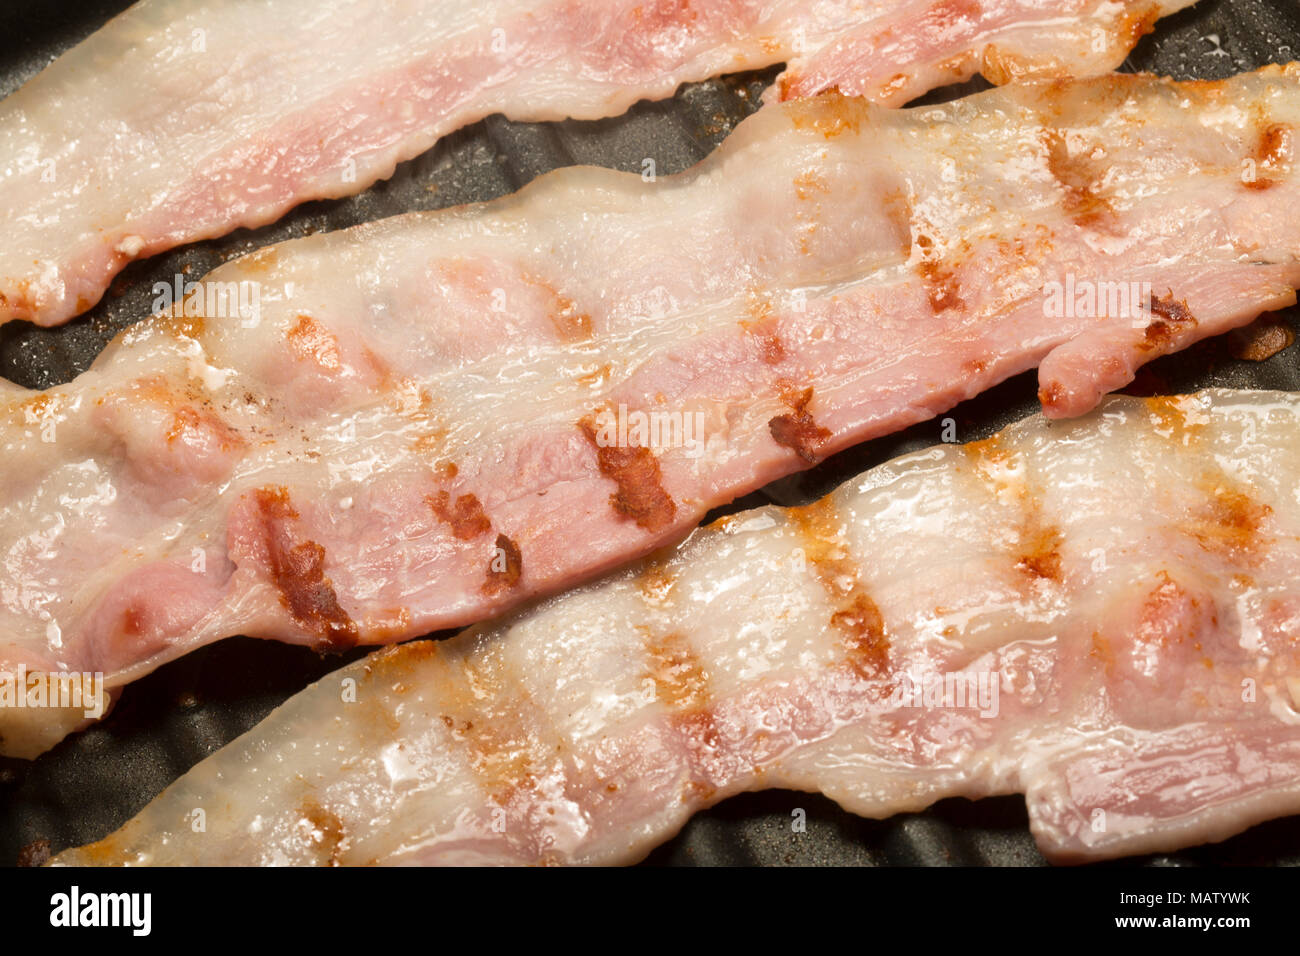 Streaky, unsmoked EU bacon from a supermarket fried on a George Foreman Fat Reducing Grill using the natural fat of the bacon. UK Stock Photo